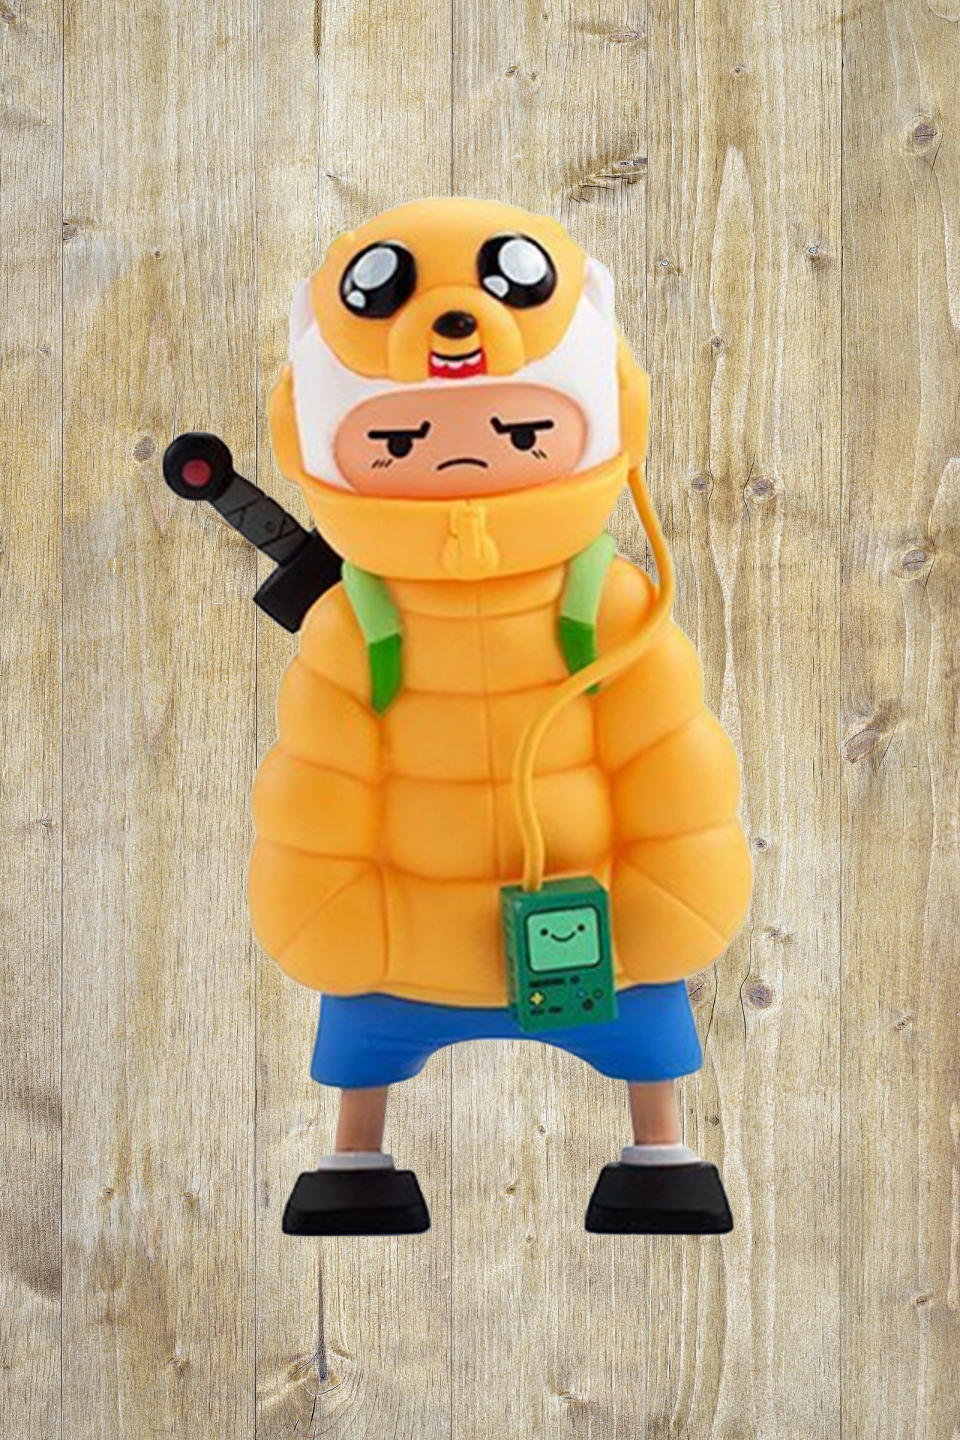 6) "Adventure Time" Collectible Figurine